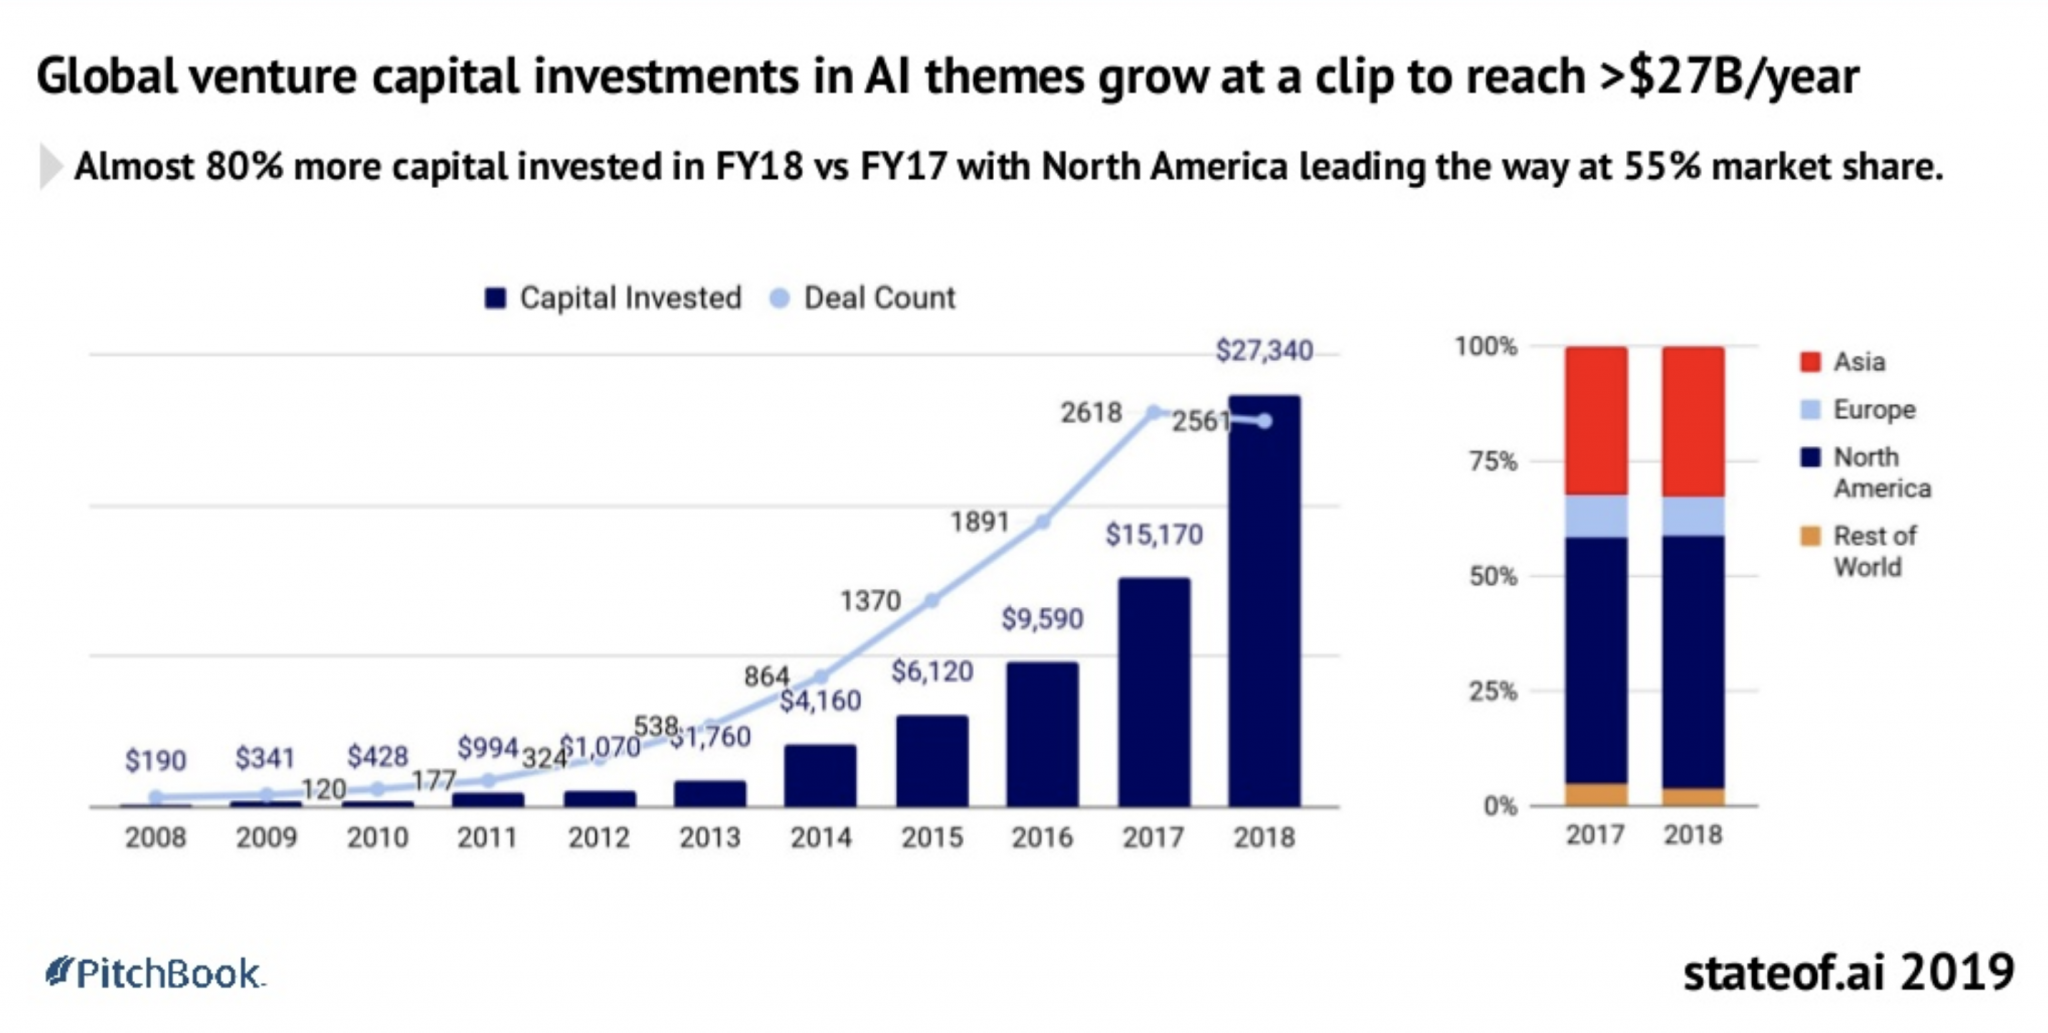 Graph showing the global venture capital investments in AI themes